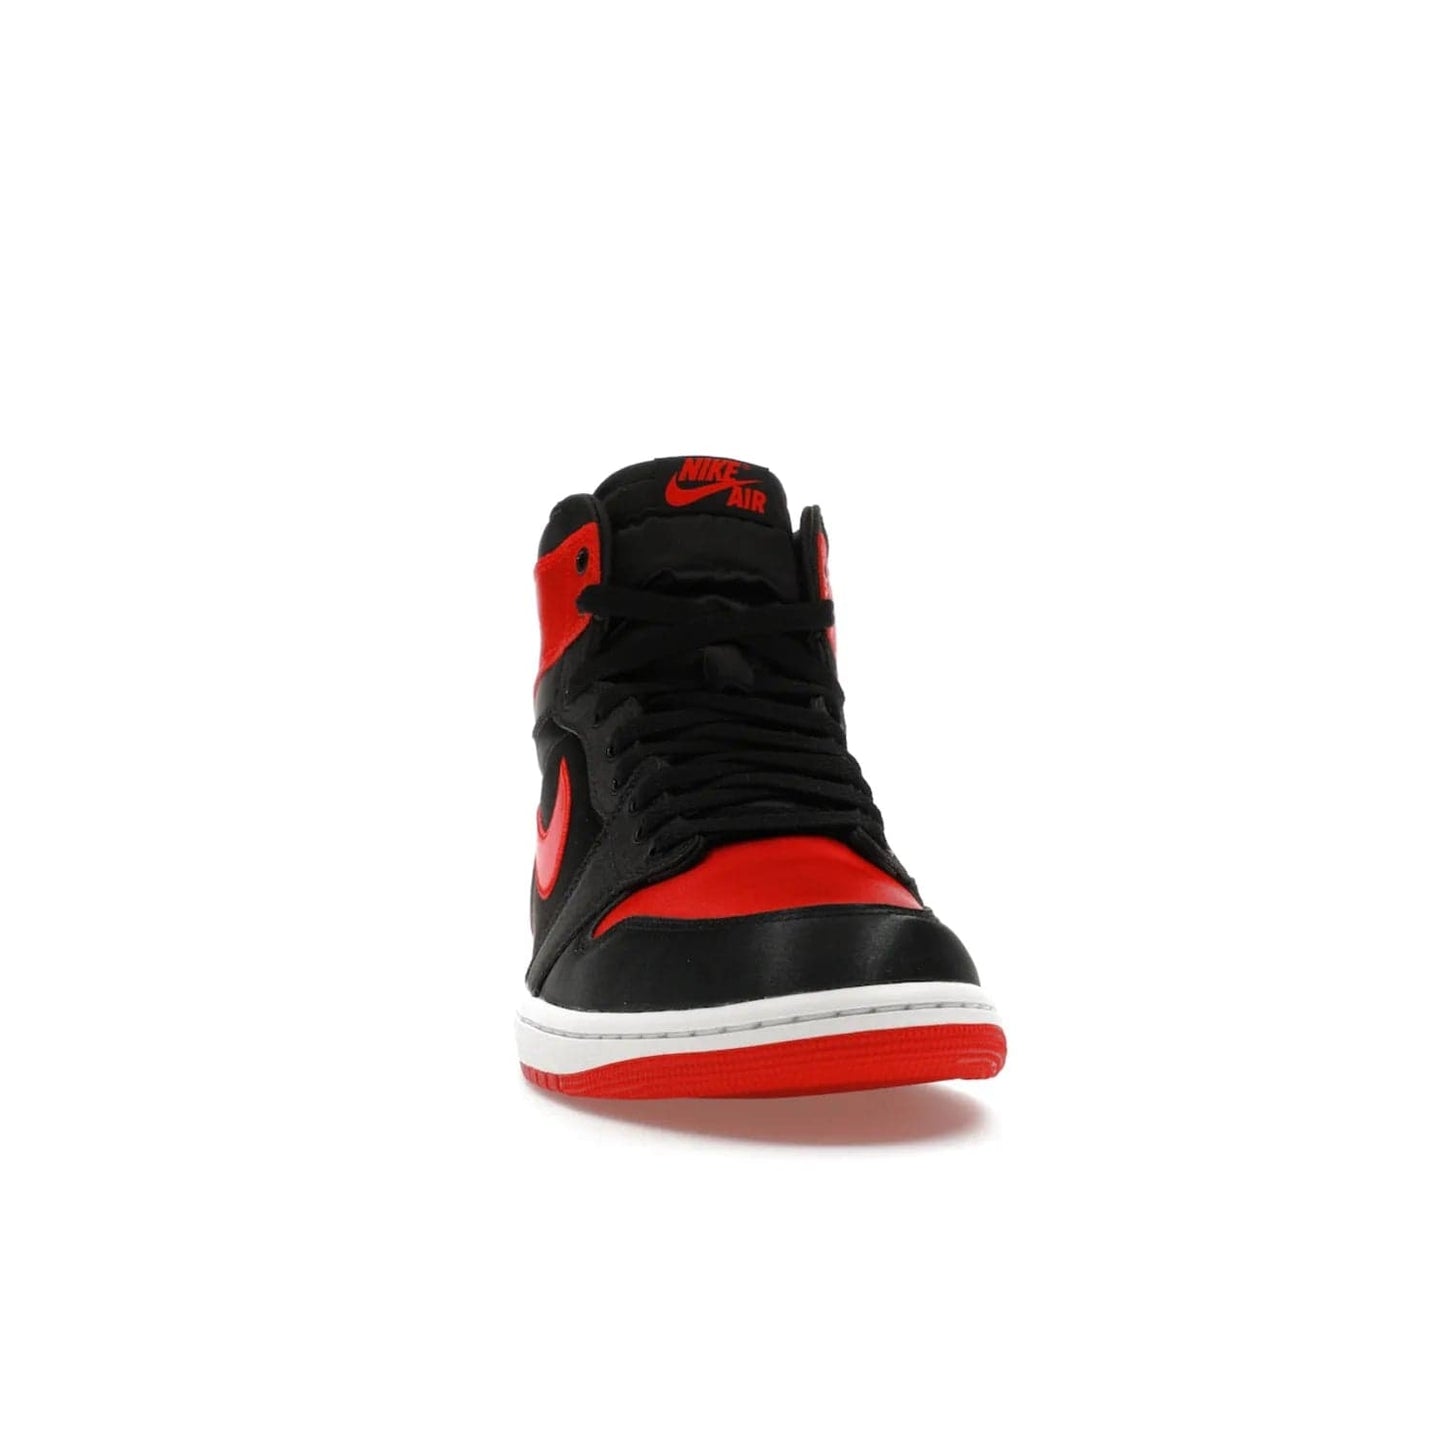 Jordan 1 Retro High OG Satin Bred (Women's) - Image 9 - Only at www.BallersClubKickz.com - Introducing the Jordan 1 Retro High OG Satin Bred (Women's). Luxe satin finish, contrasting hues & classic accents. Trending sneakers symbolizing timelessness & heritage. Make a bold statement with this iconic shoe. Available October 4, 2023.